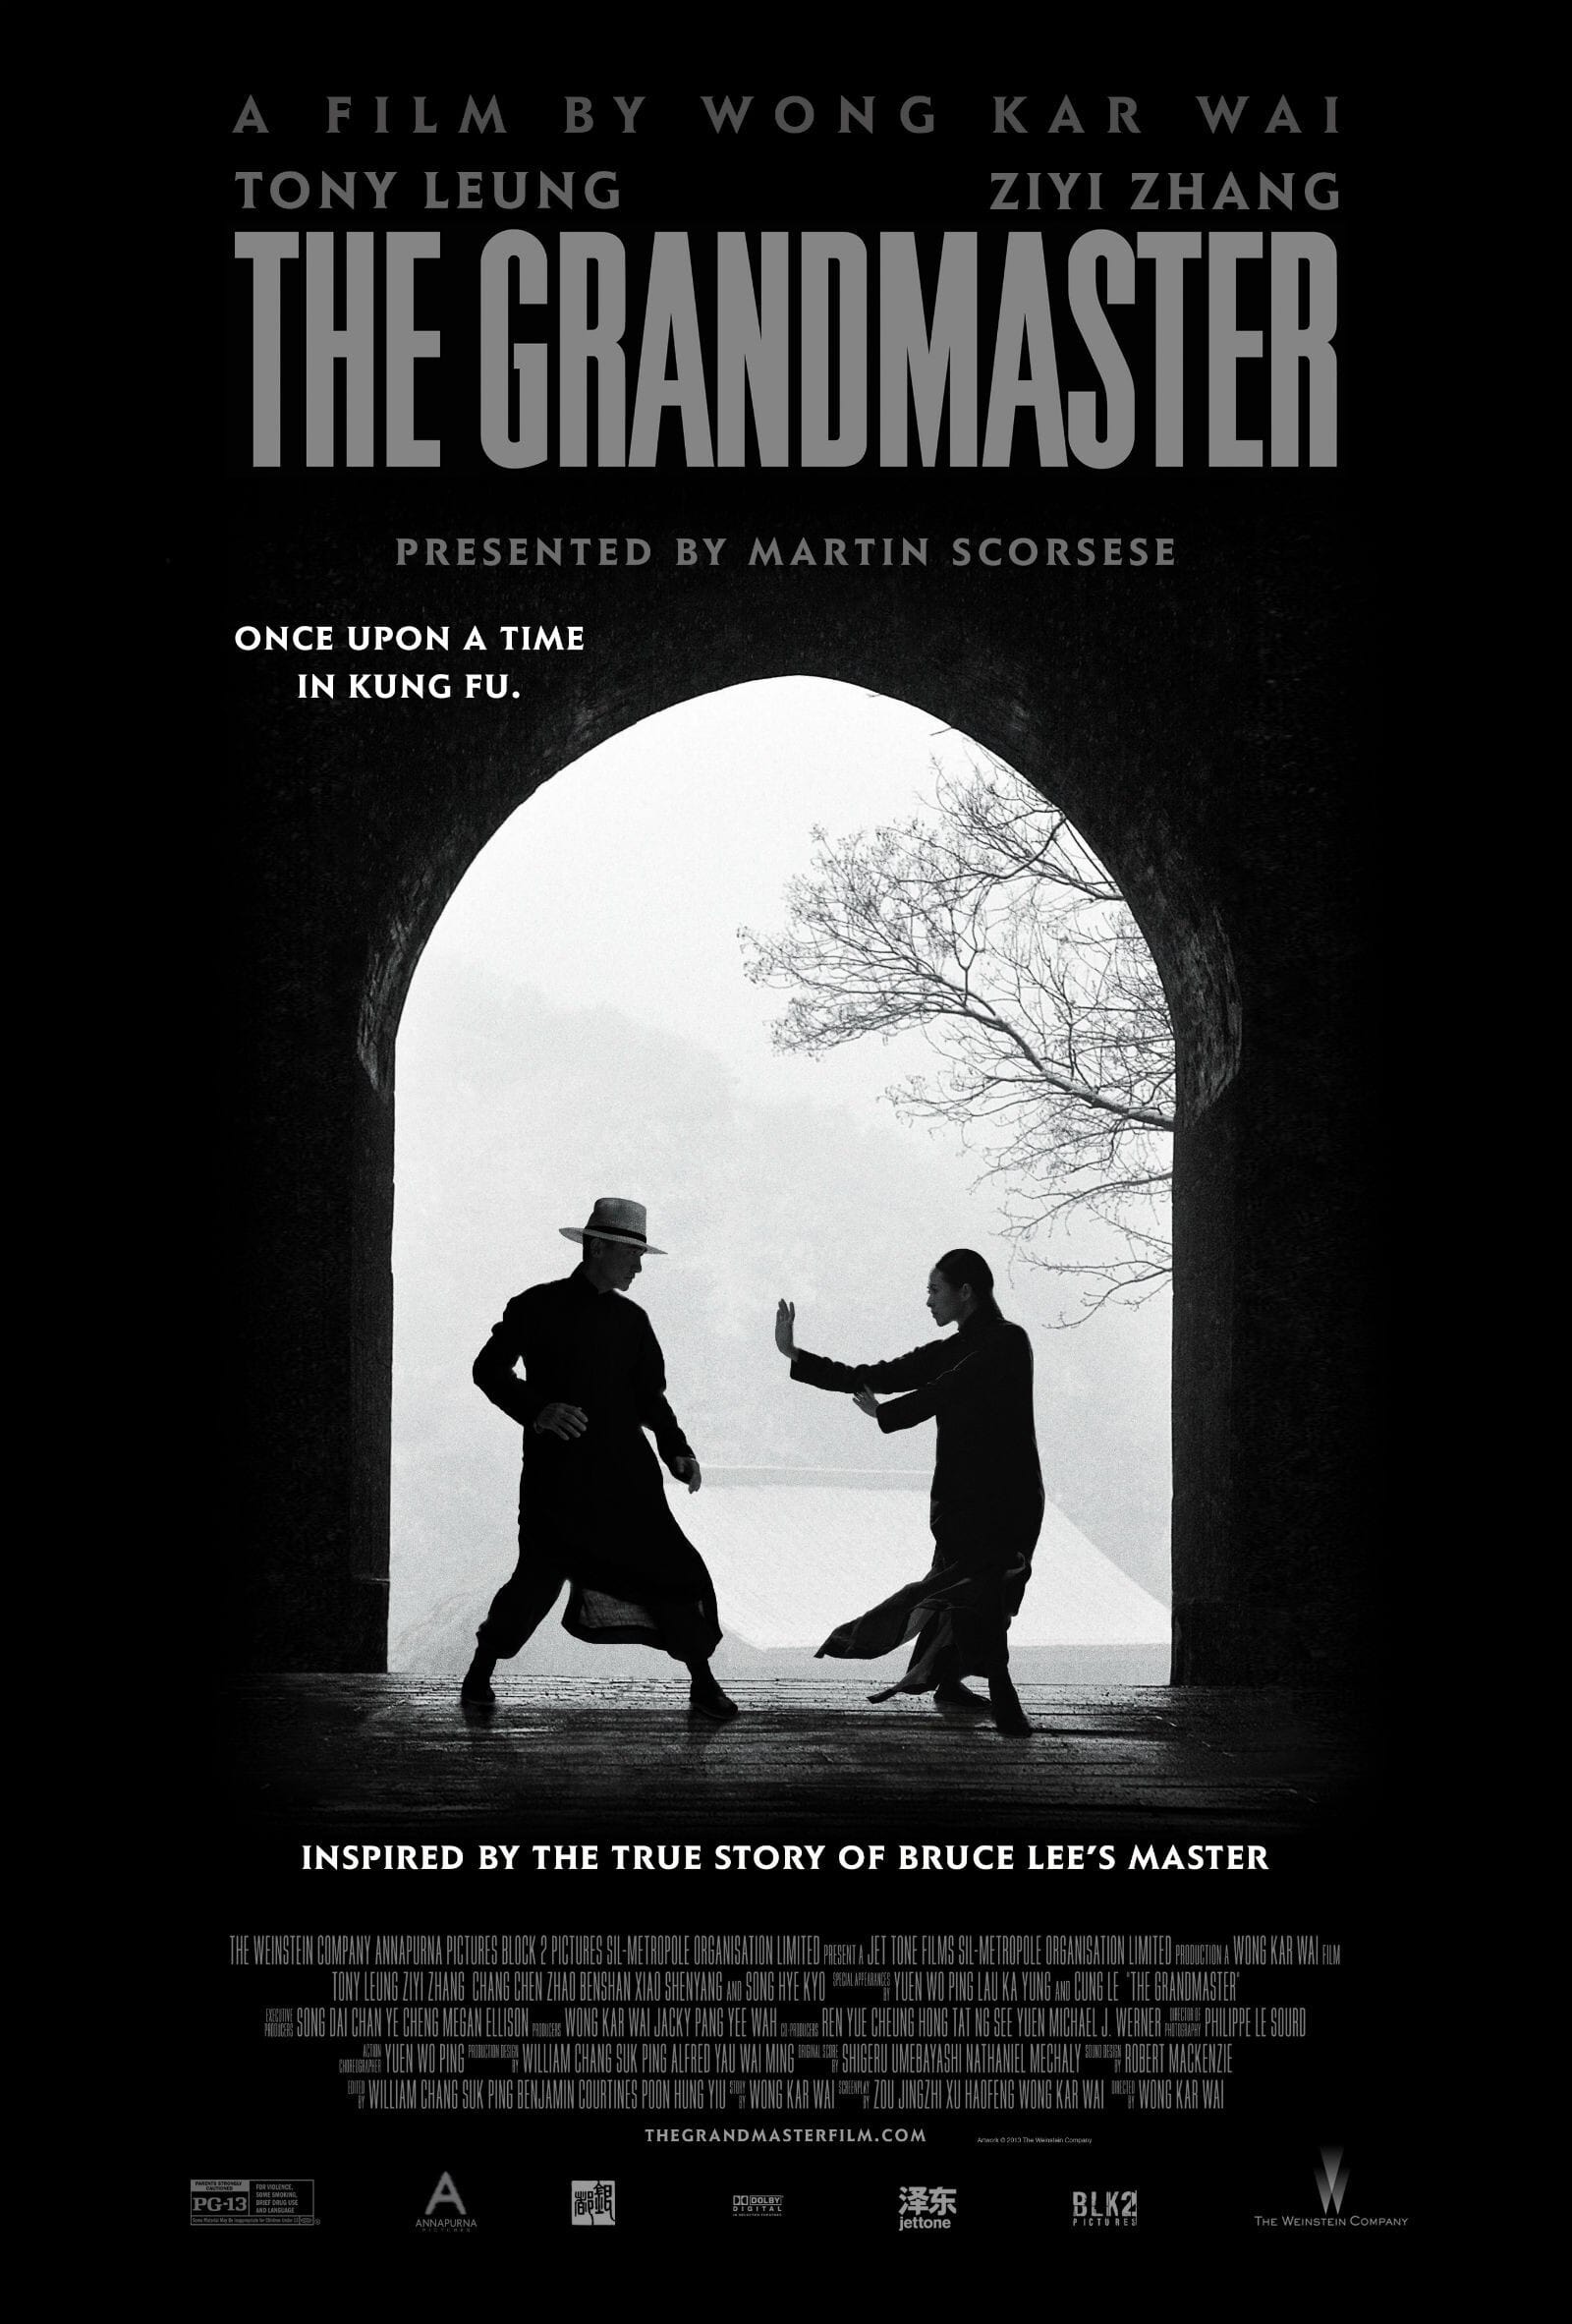 The Making of the Grandmaster